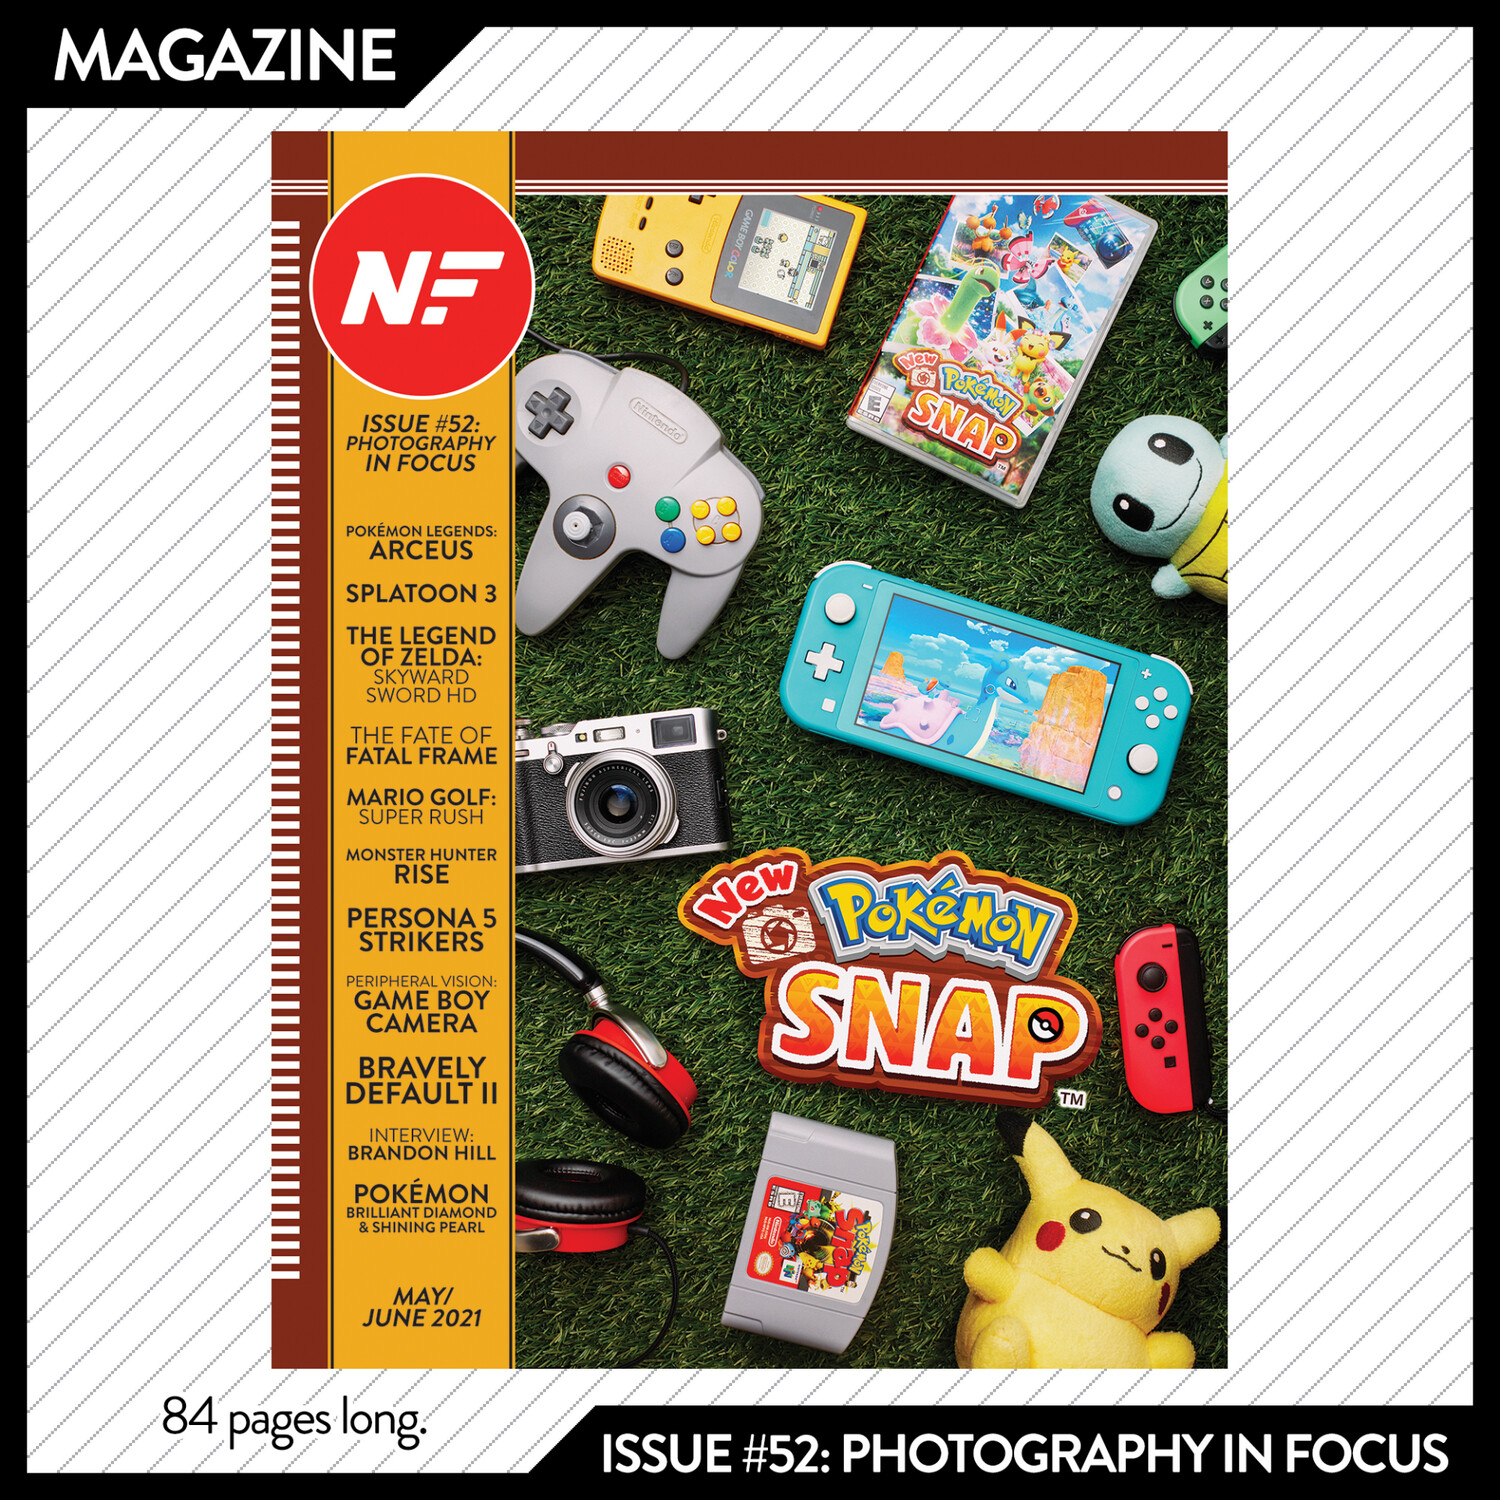 Issue #52: Photography in Focus – May/June 2021